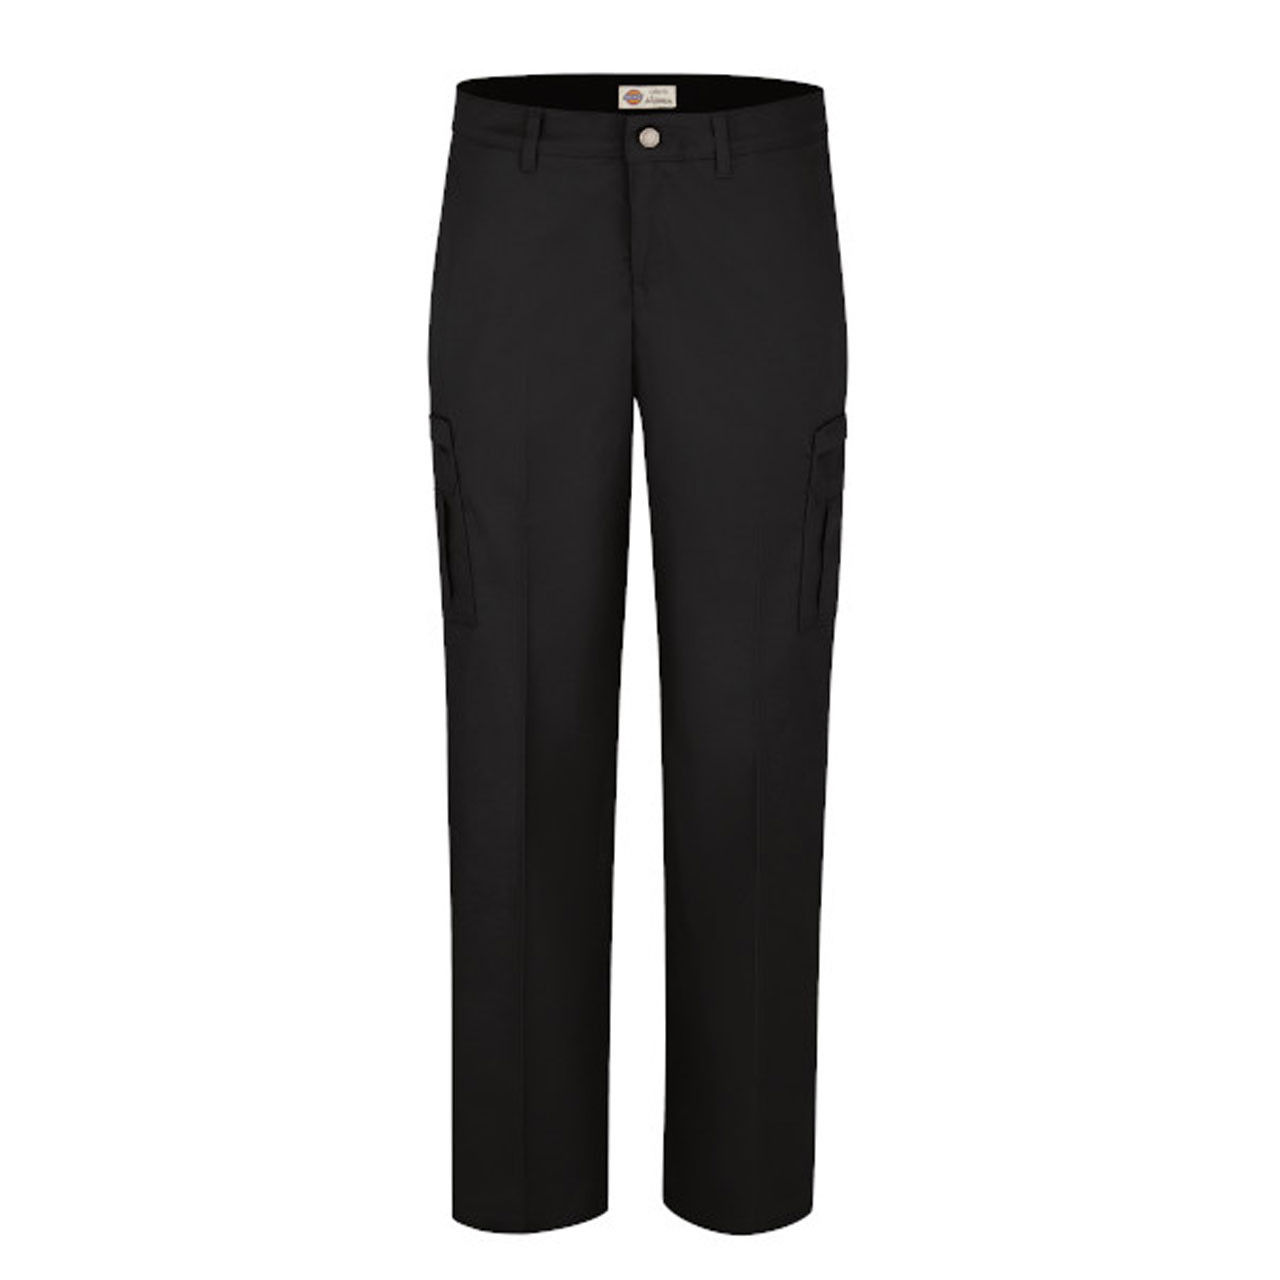 What pockets do Dickies size chart women's pants feature?